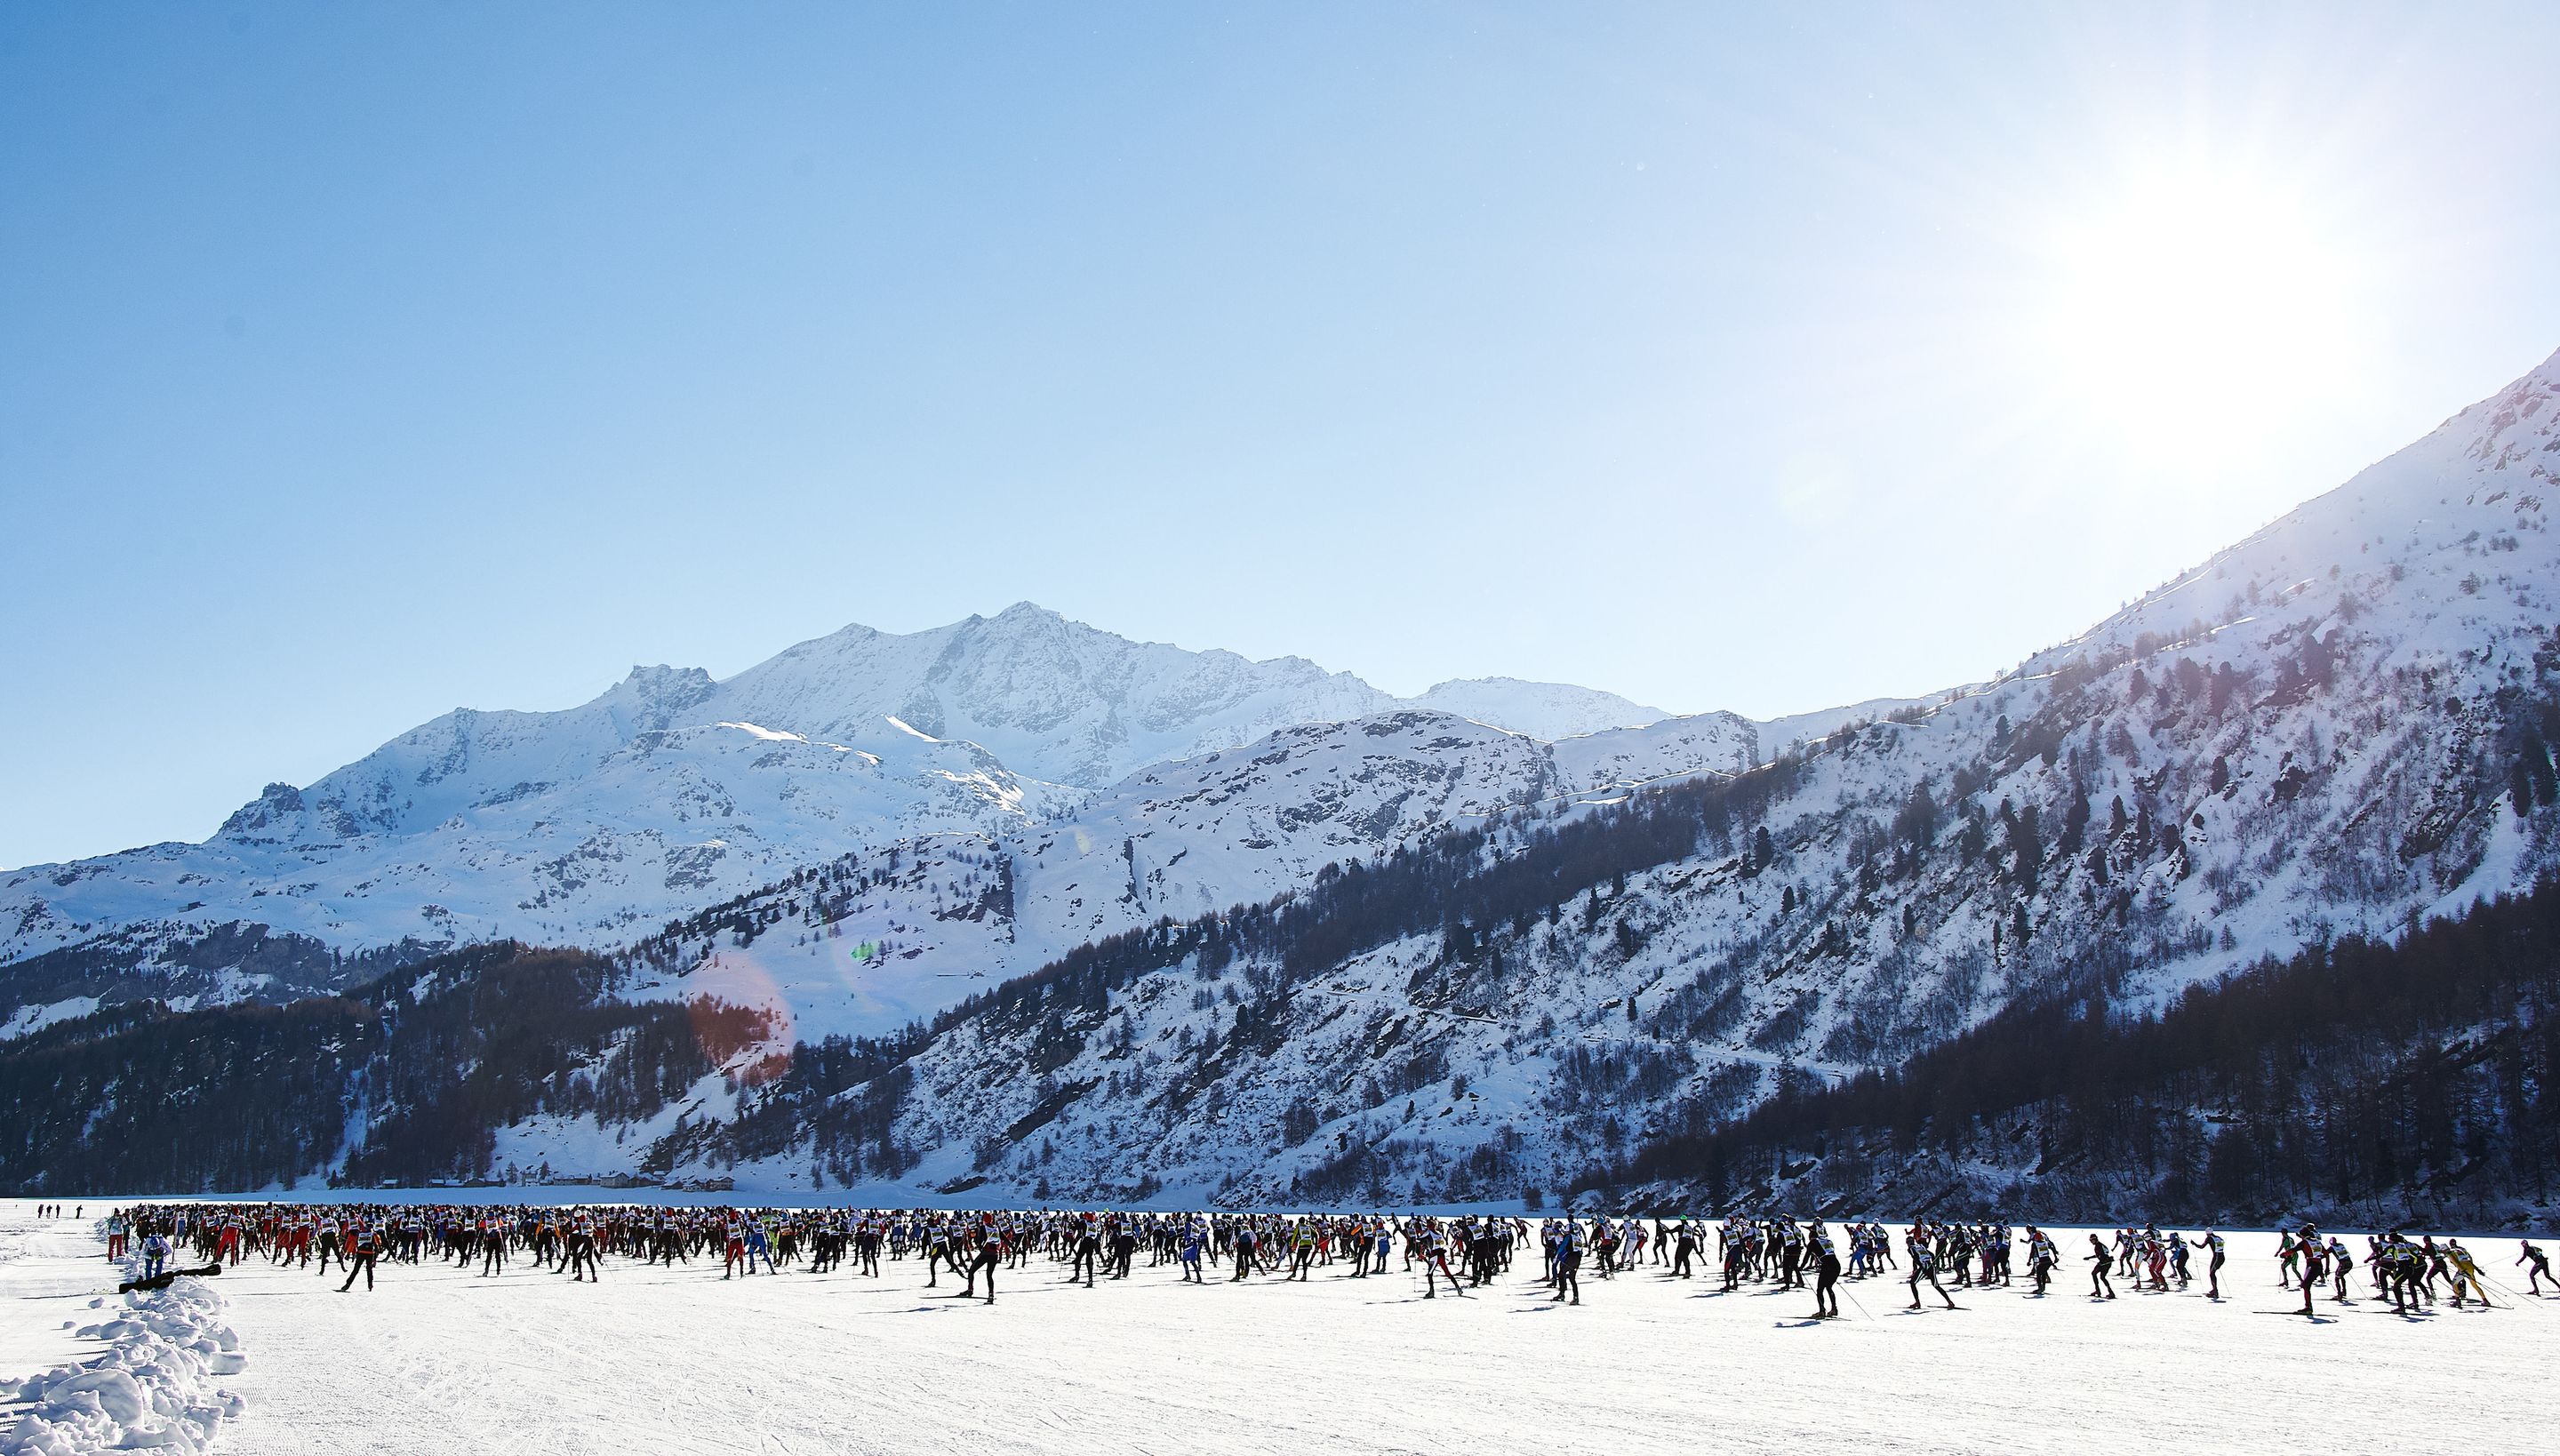 A scenic race course awaits the World Cup athletes that will follow the course profile of the Engadin Skimarathon. Image by NordicFocus